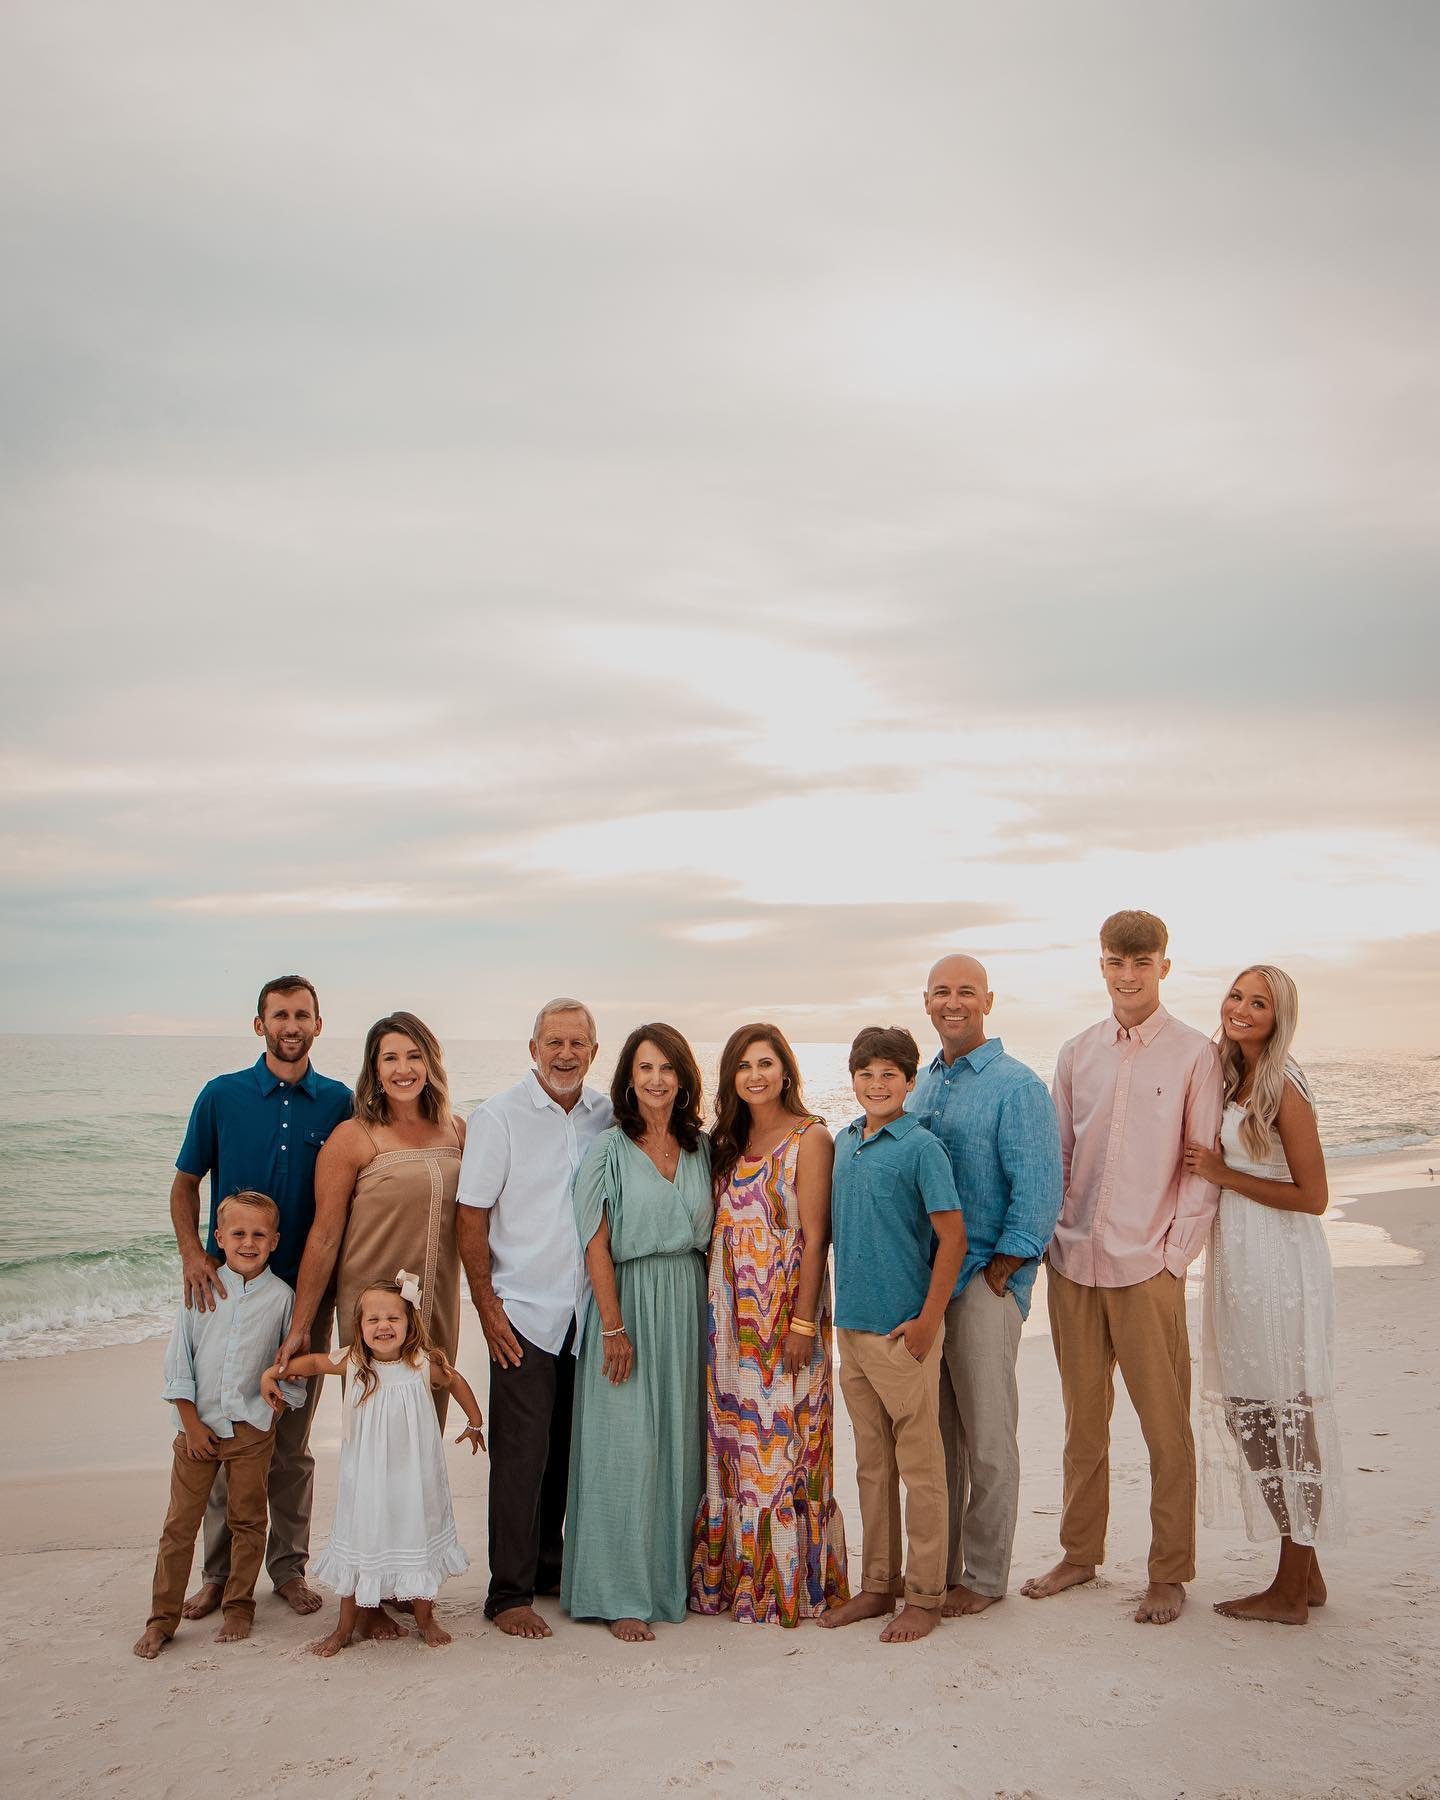 some favorites from this beautiful sunset shoot with this sweet family 🤍

&hellip;&hellip;&hellip;.
#30alifestylephotographer #30afashionphotographer #30afamilyphotos #familyphotographer #30acouplesphotographer #photographersof30a #30afamilyphotogra